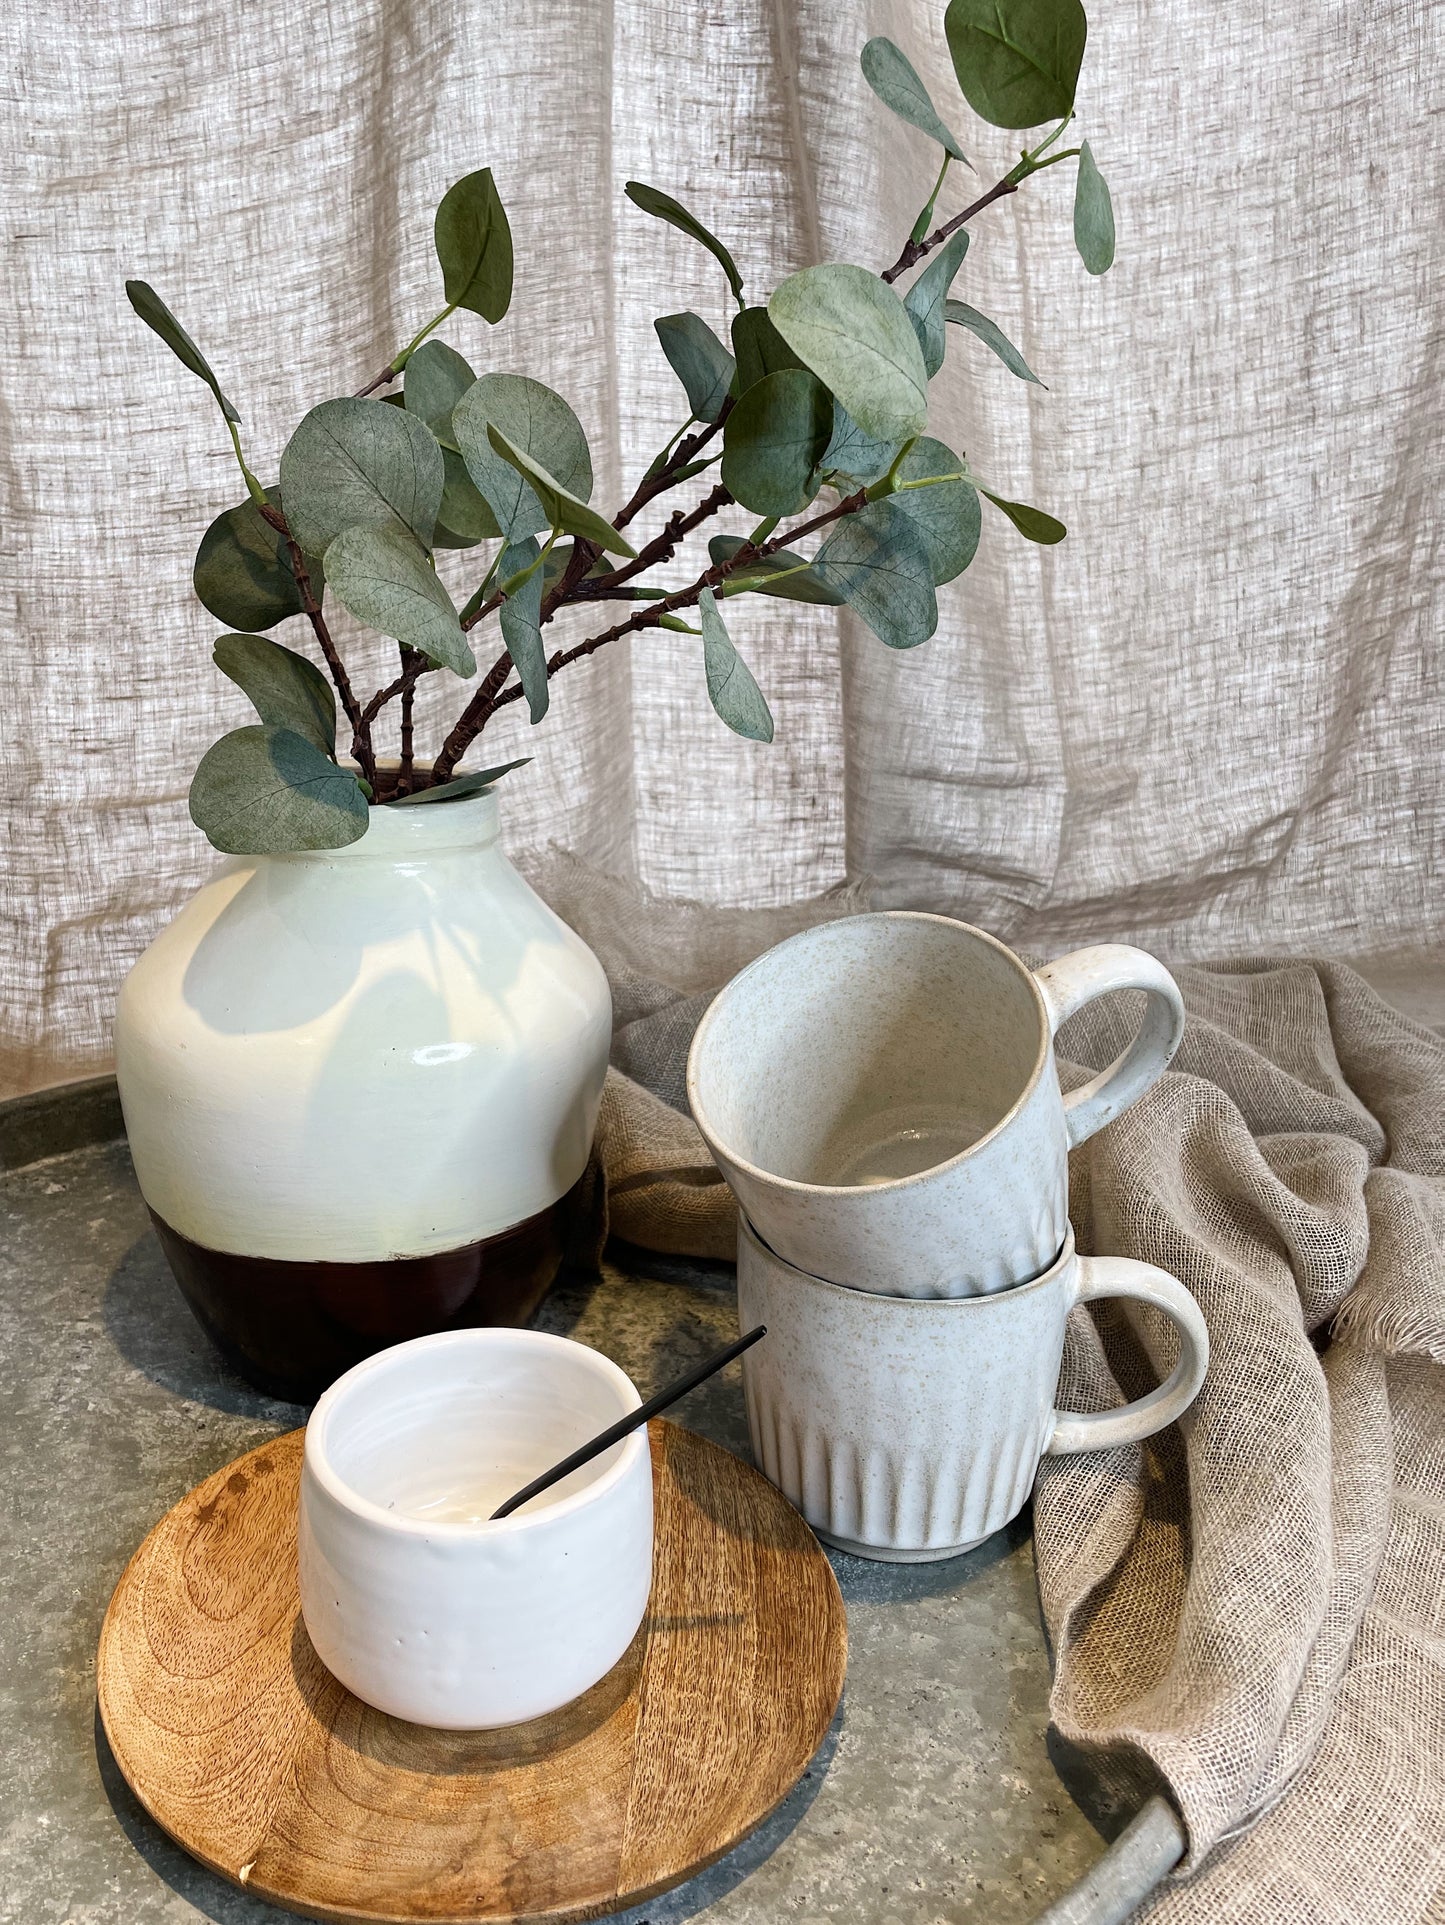 Brown and white vase, filled with eucalyptus leaves, on a metal tray with a wooden plate, small white bowl and two white mugs, surrounded by natural linen